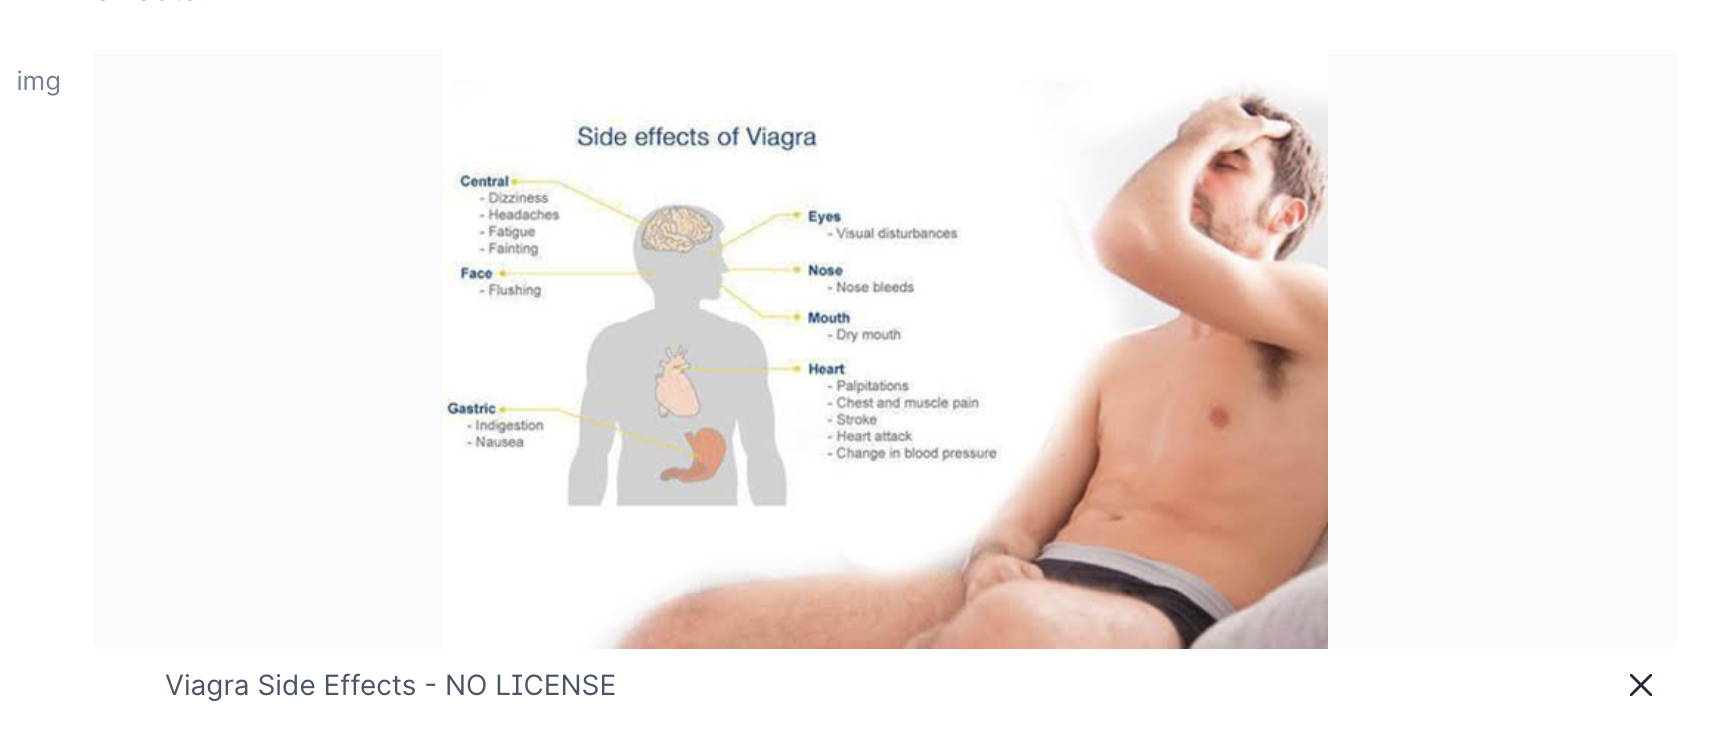 Viagra Side Effects - NO LICENSE